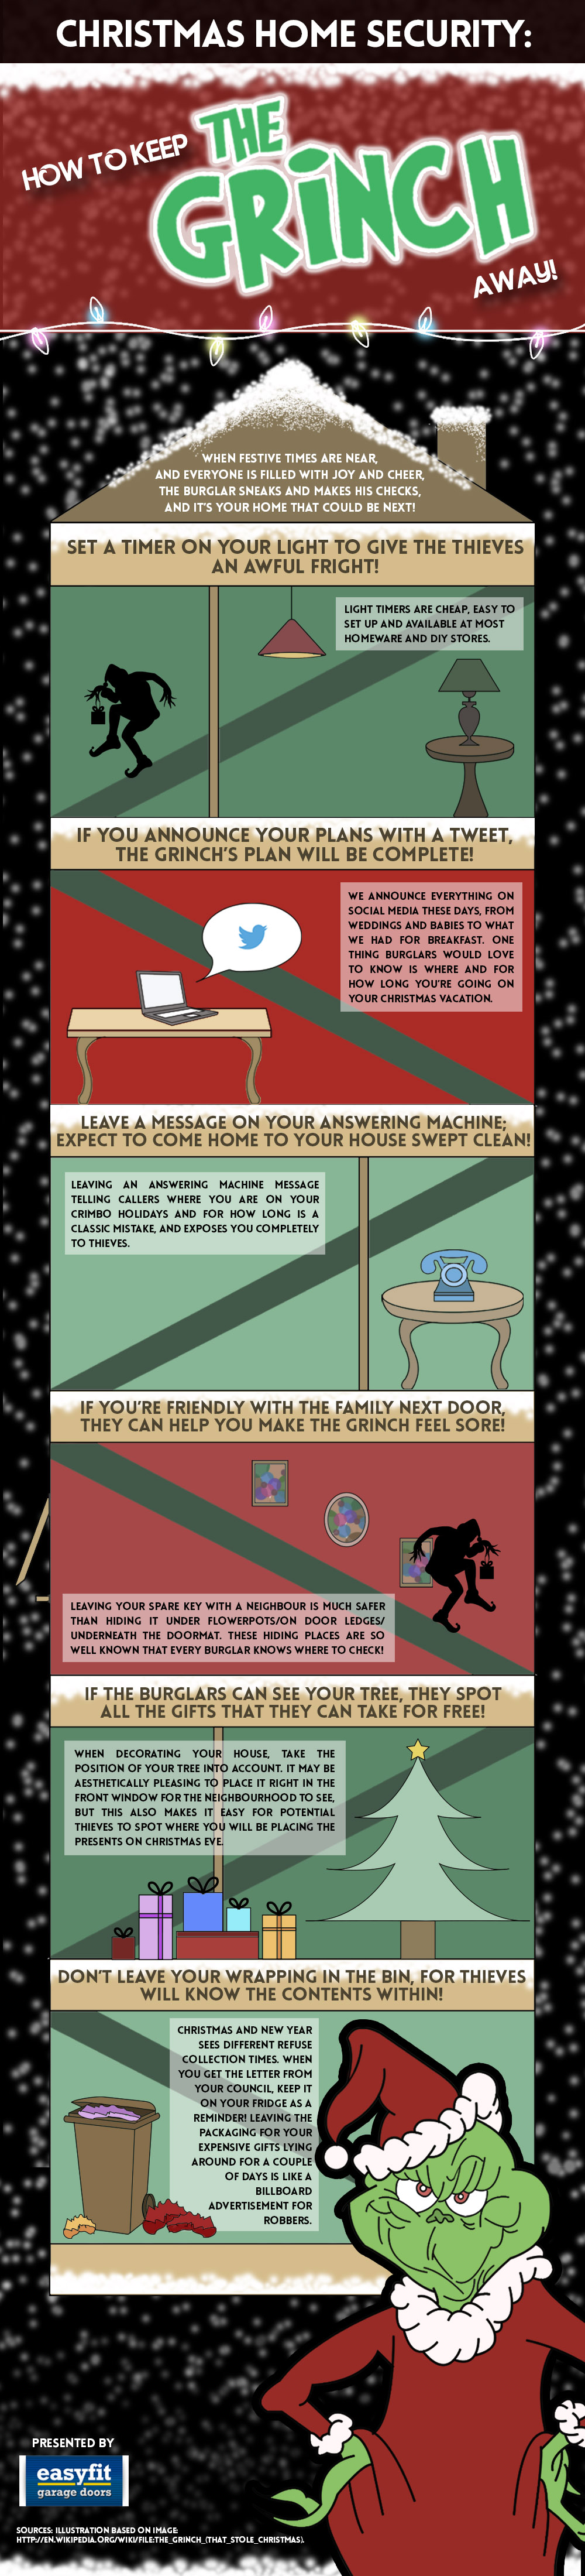 How To Keep The Grinch Away - Infographic - updated